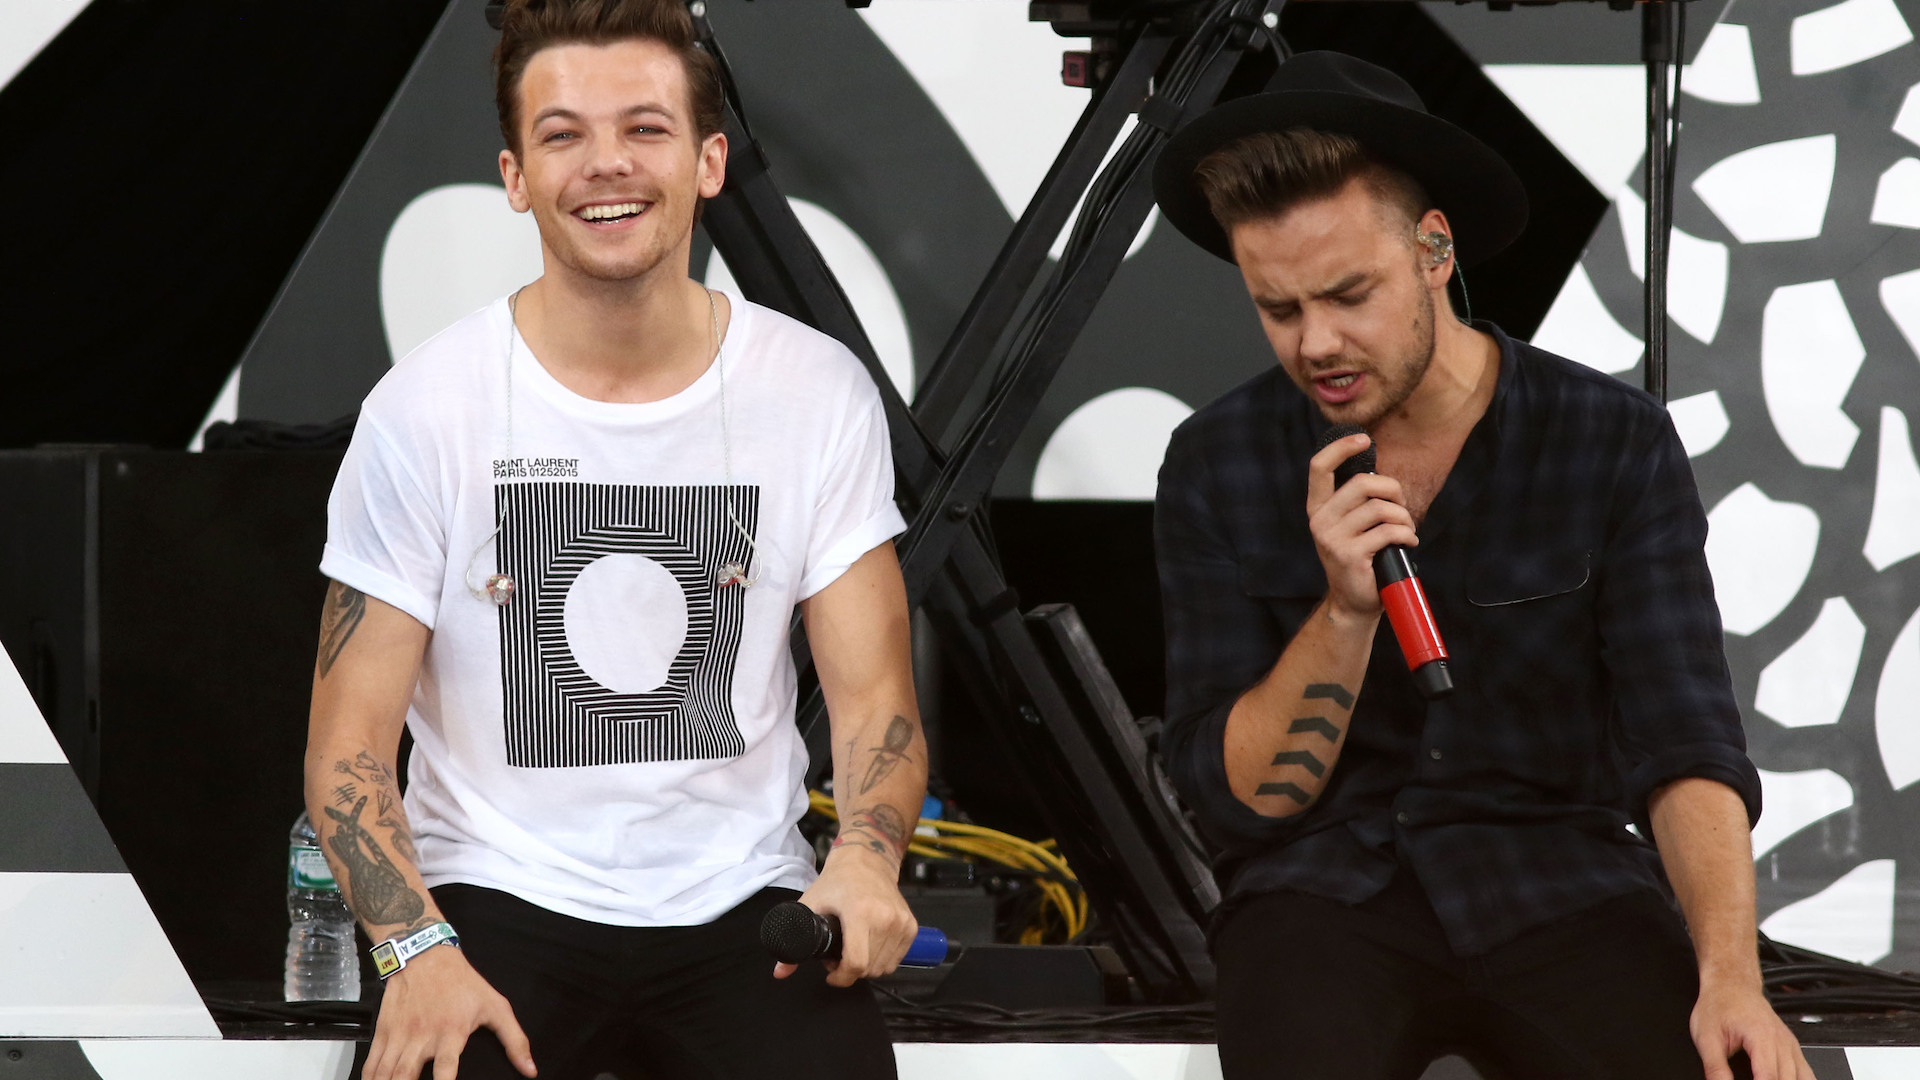 Liam Payne and Louis Tomlinson of One Direction perform on 'Good Morning America' in Central Park in New York City